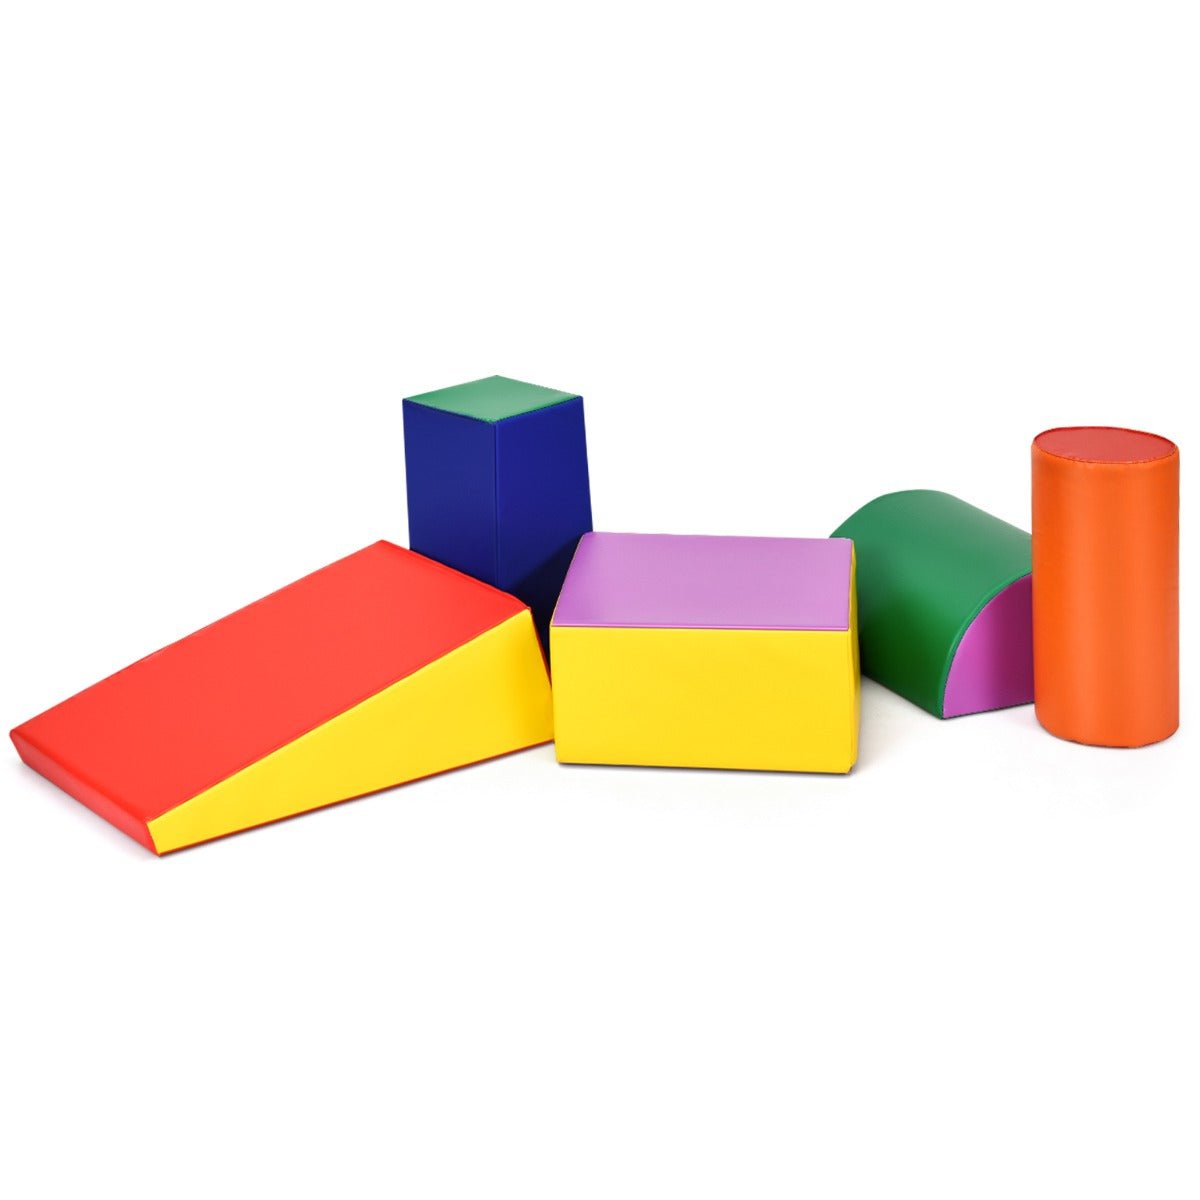 Multicolour Toddler Foam Shapes Playset: The Ultimate Adventure!